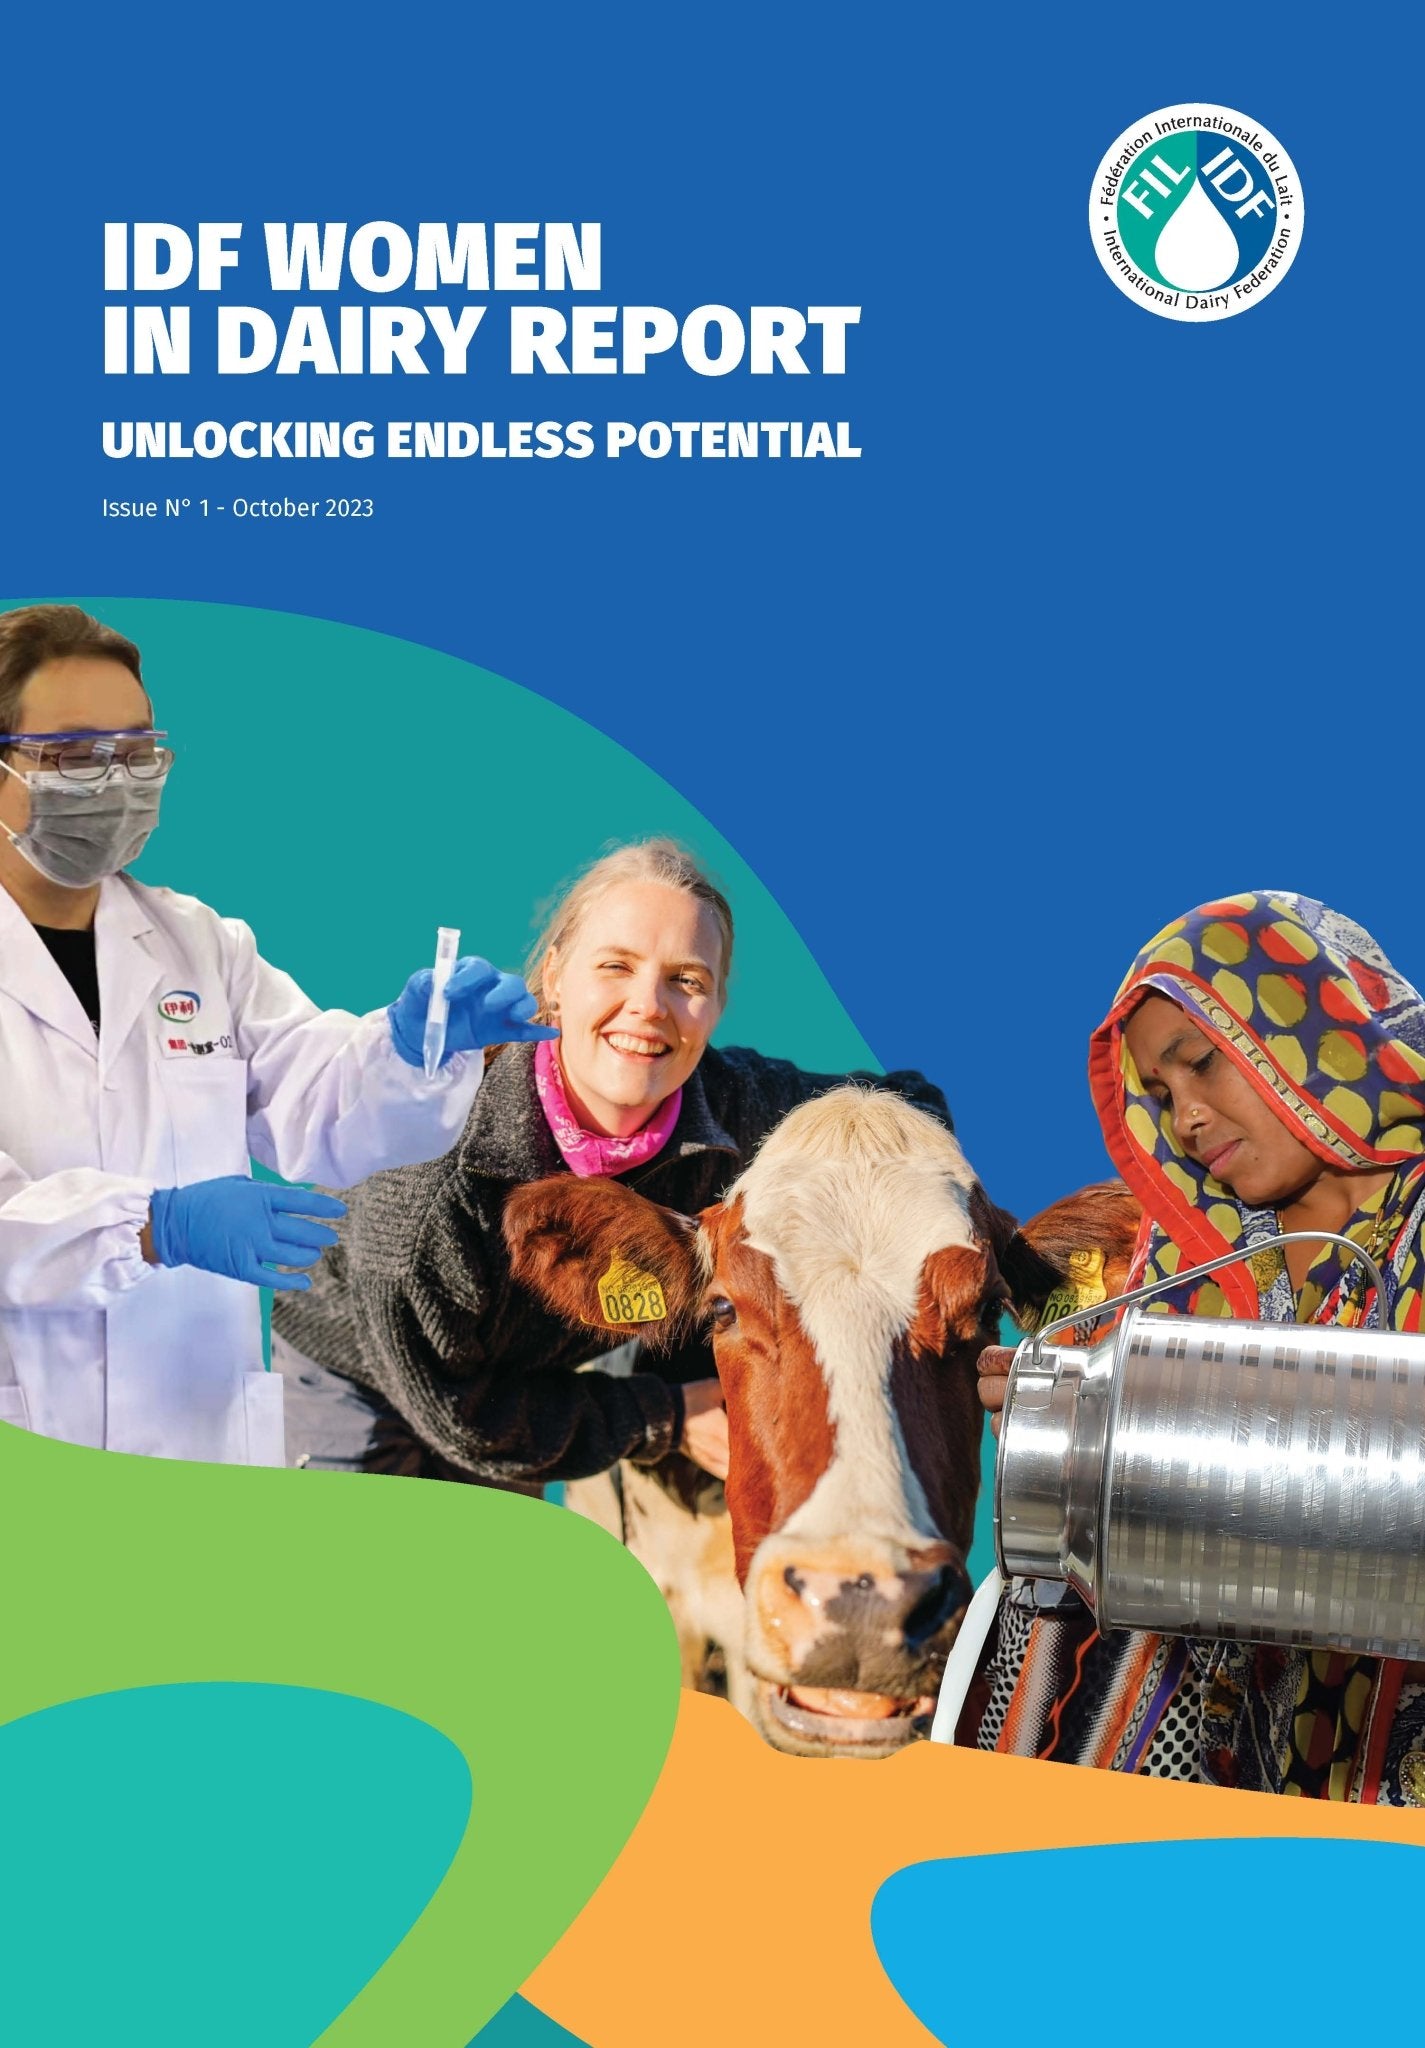 Issue 1: IDF Women in Dairy Report 2023 - Unlocking Endless Potential - FIL-IDF